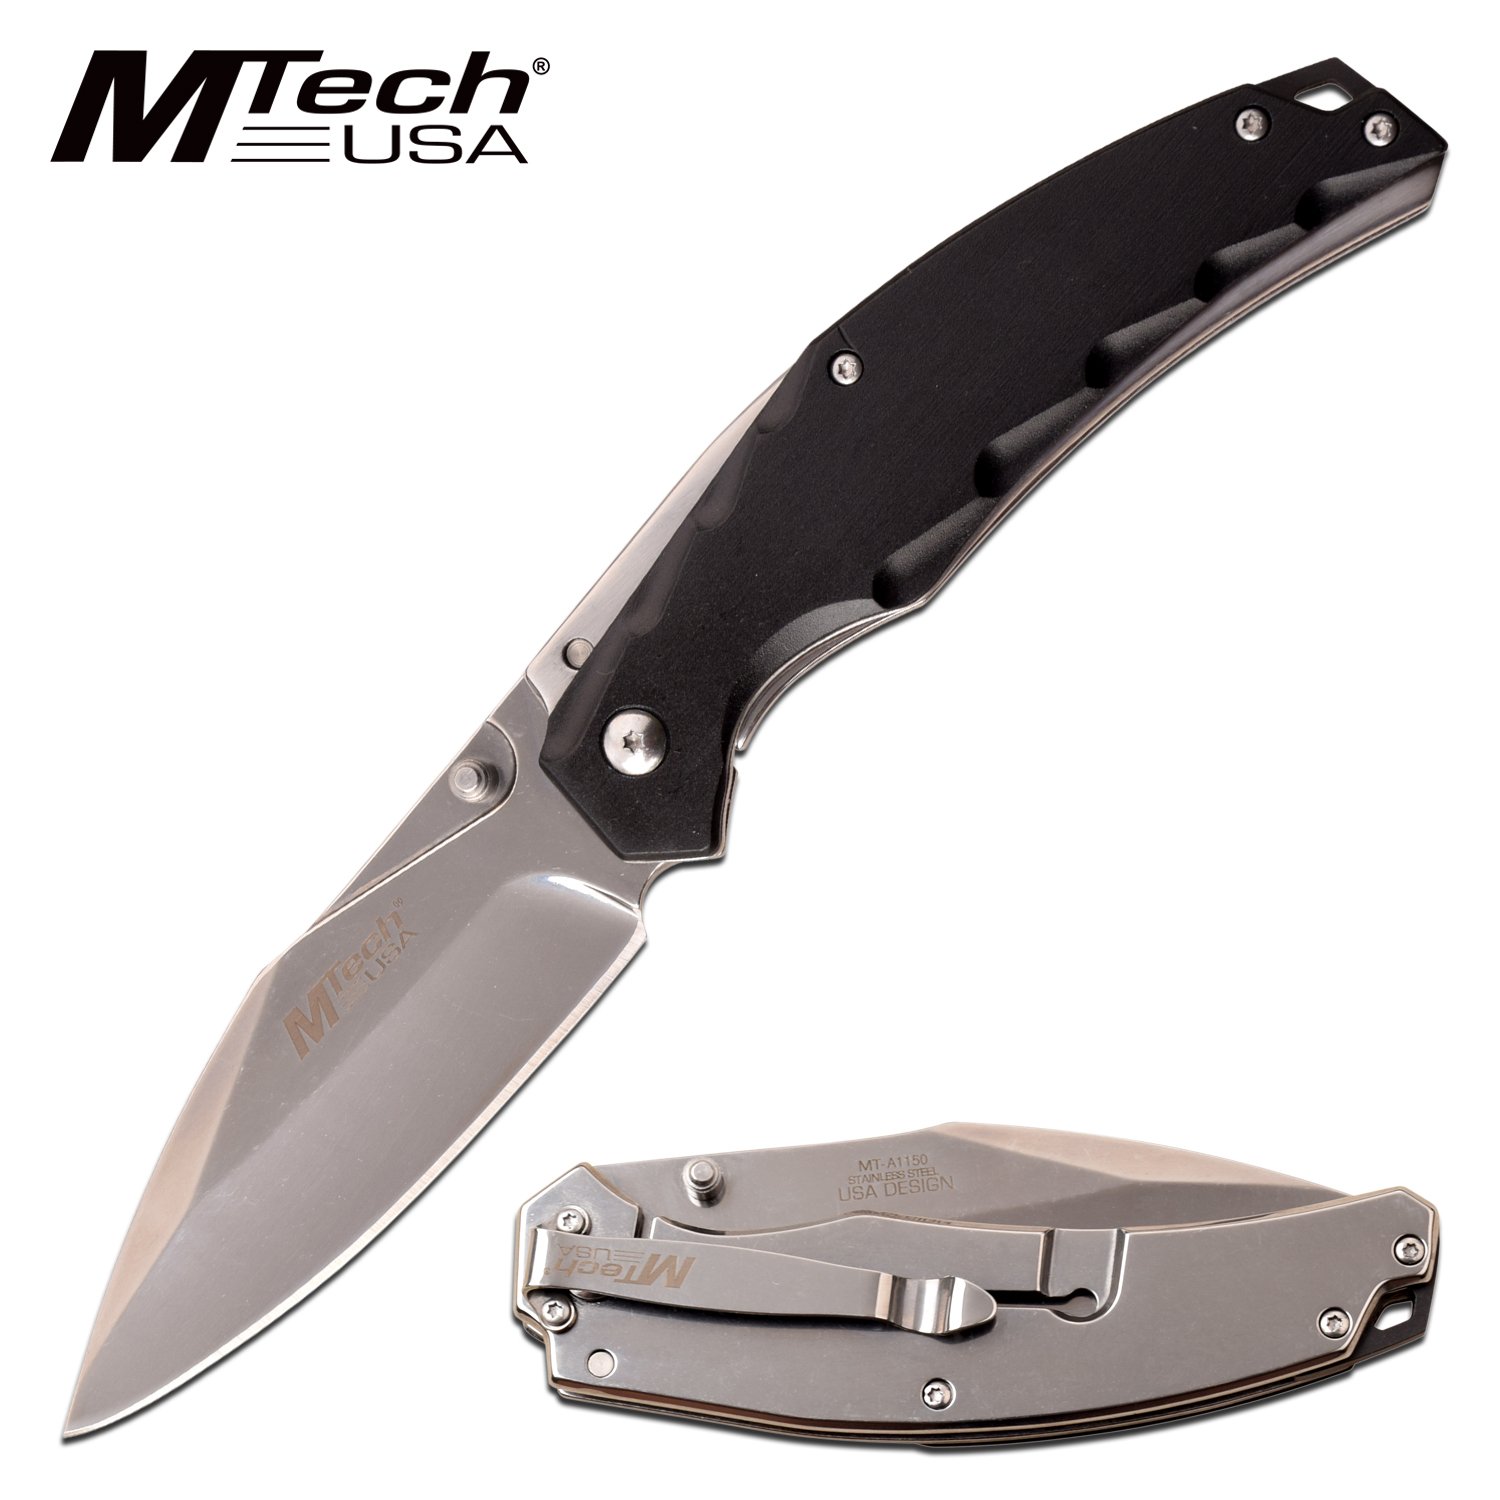 Spring-Assist Folding Knife Mtech Black Handle Mirror 3.75in. Blade EDC Tactical